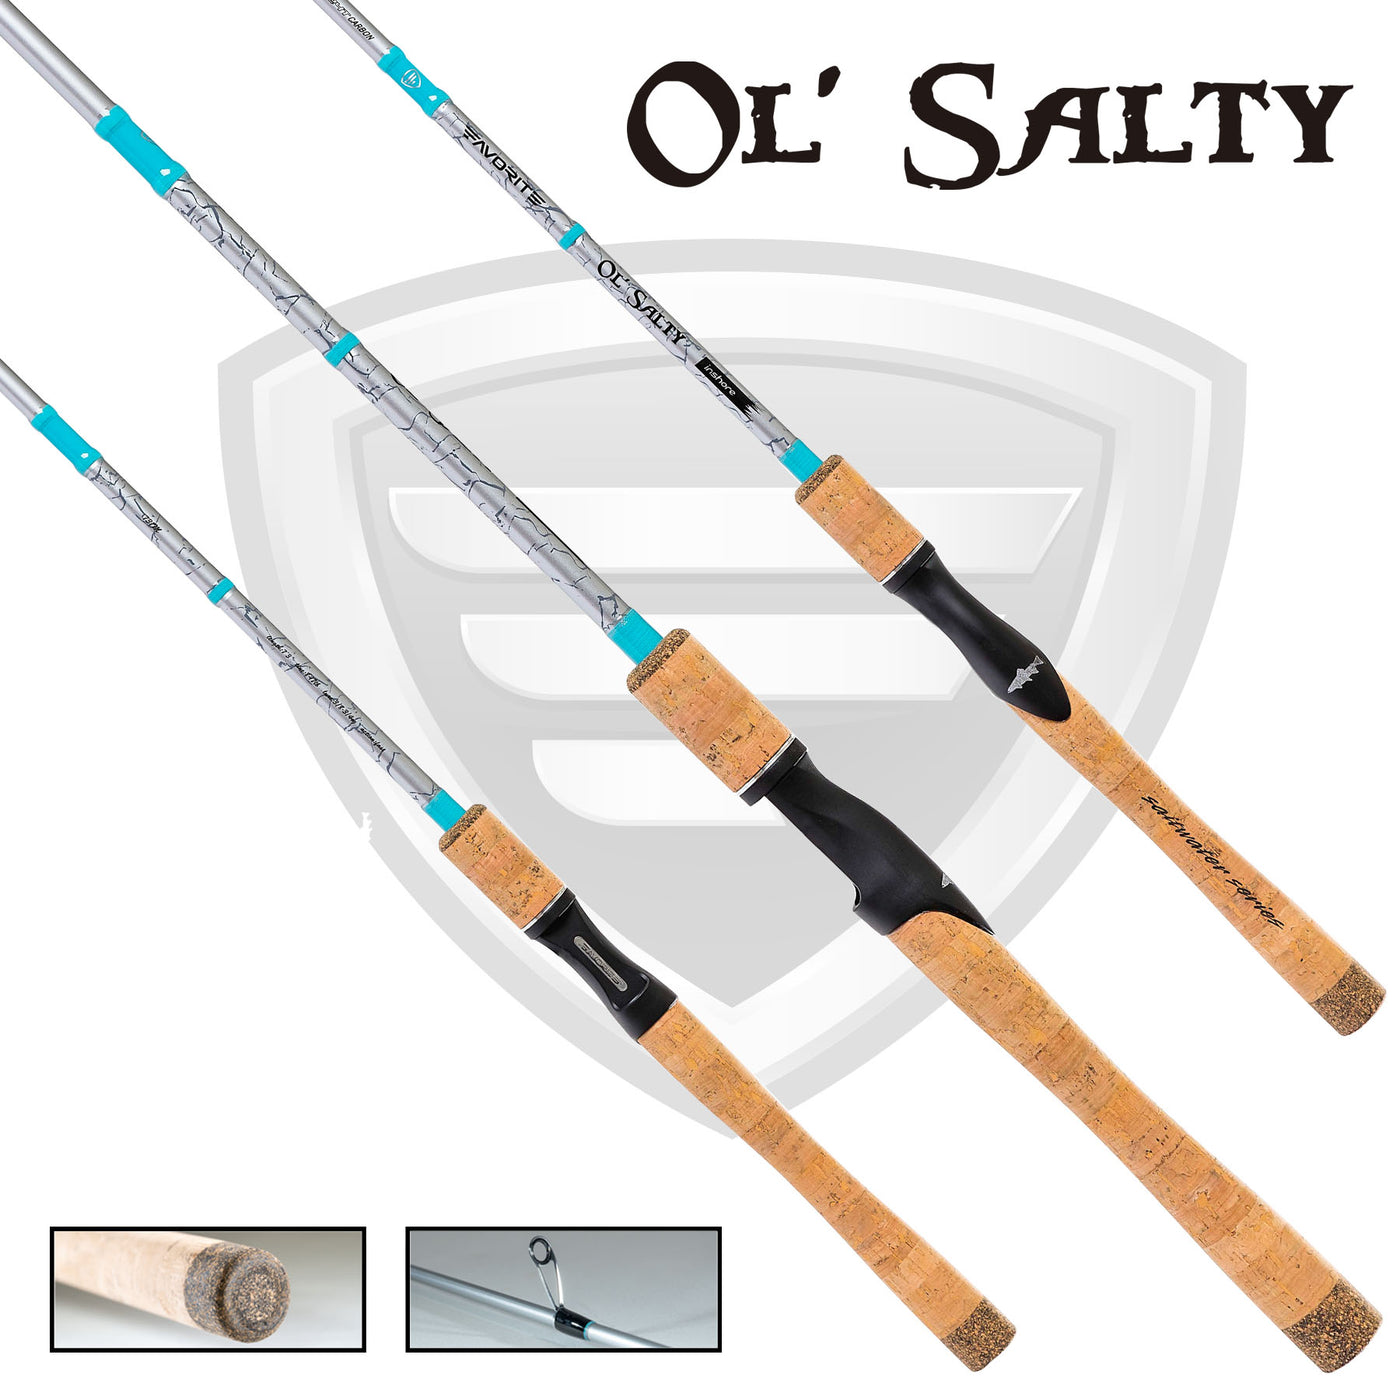 Favorite Fishing Ol Salty 7 ft 3 in Spinning Rod and Reel Combo